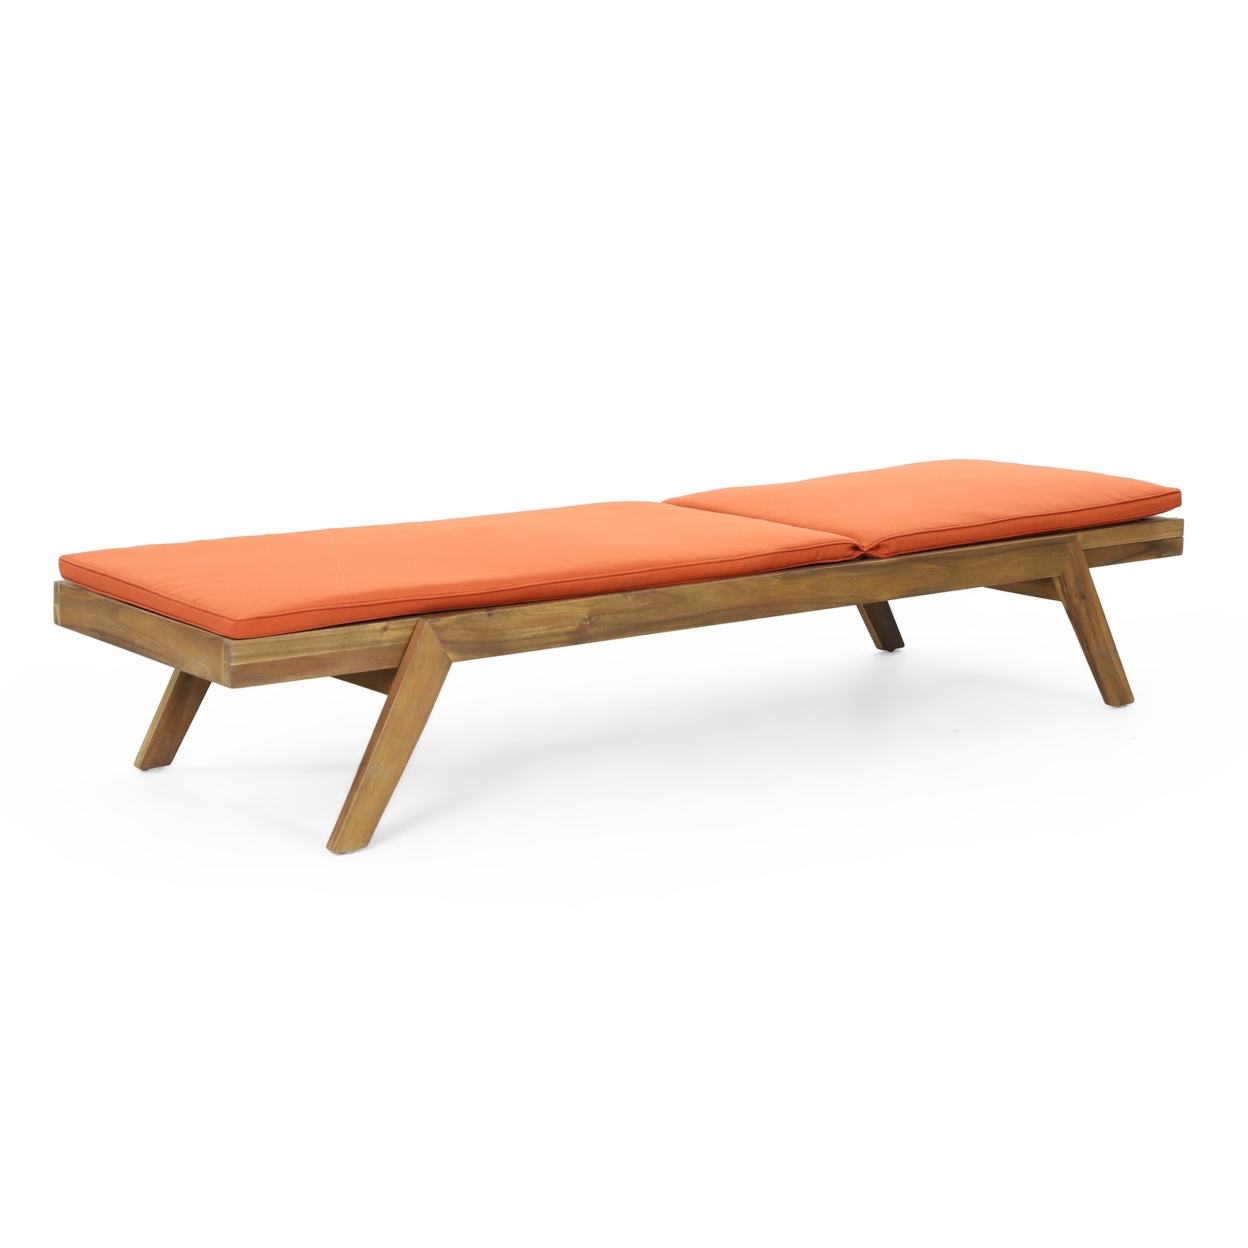 Larimore Outdoor Acacia Wood Chaise Lounge With Water Resistant Cushions, Set Of 4 - Teak/orange